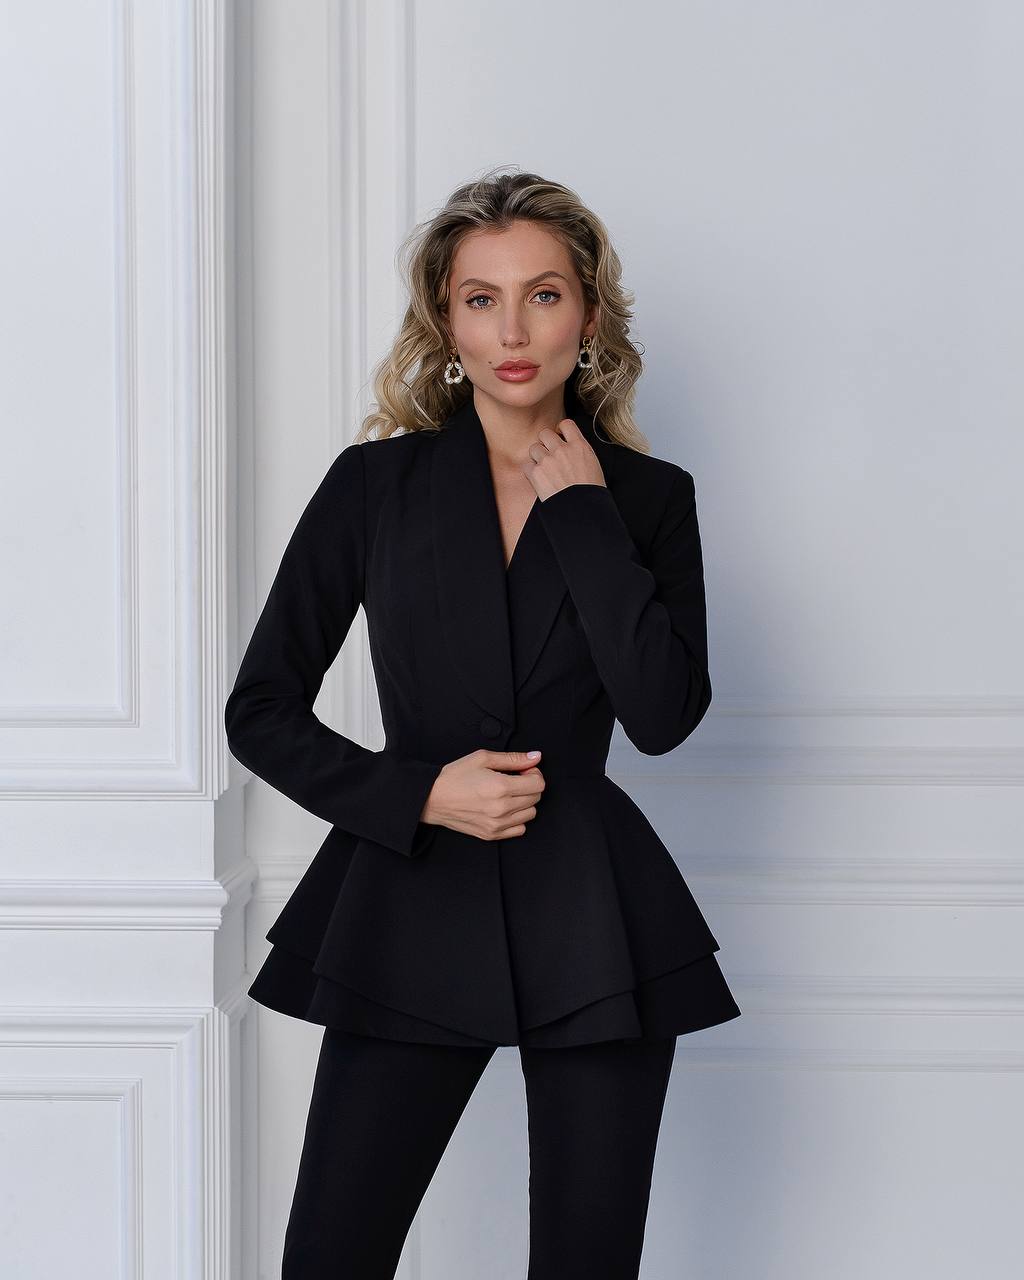 a woman in a black suit posing for a picture